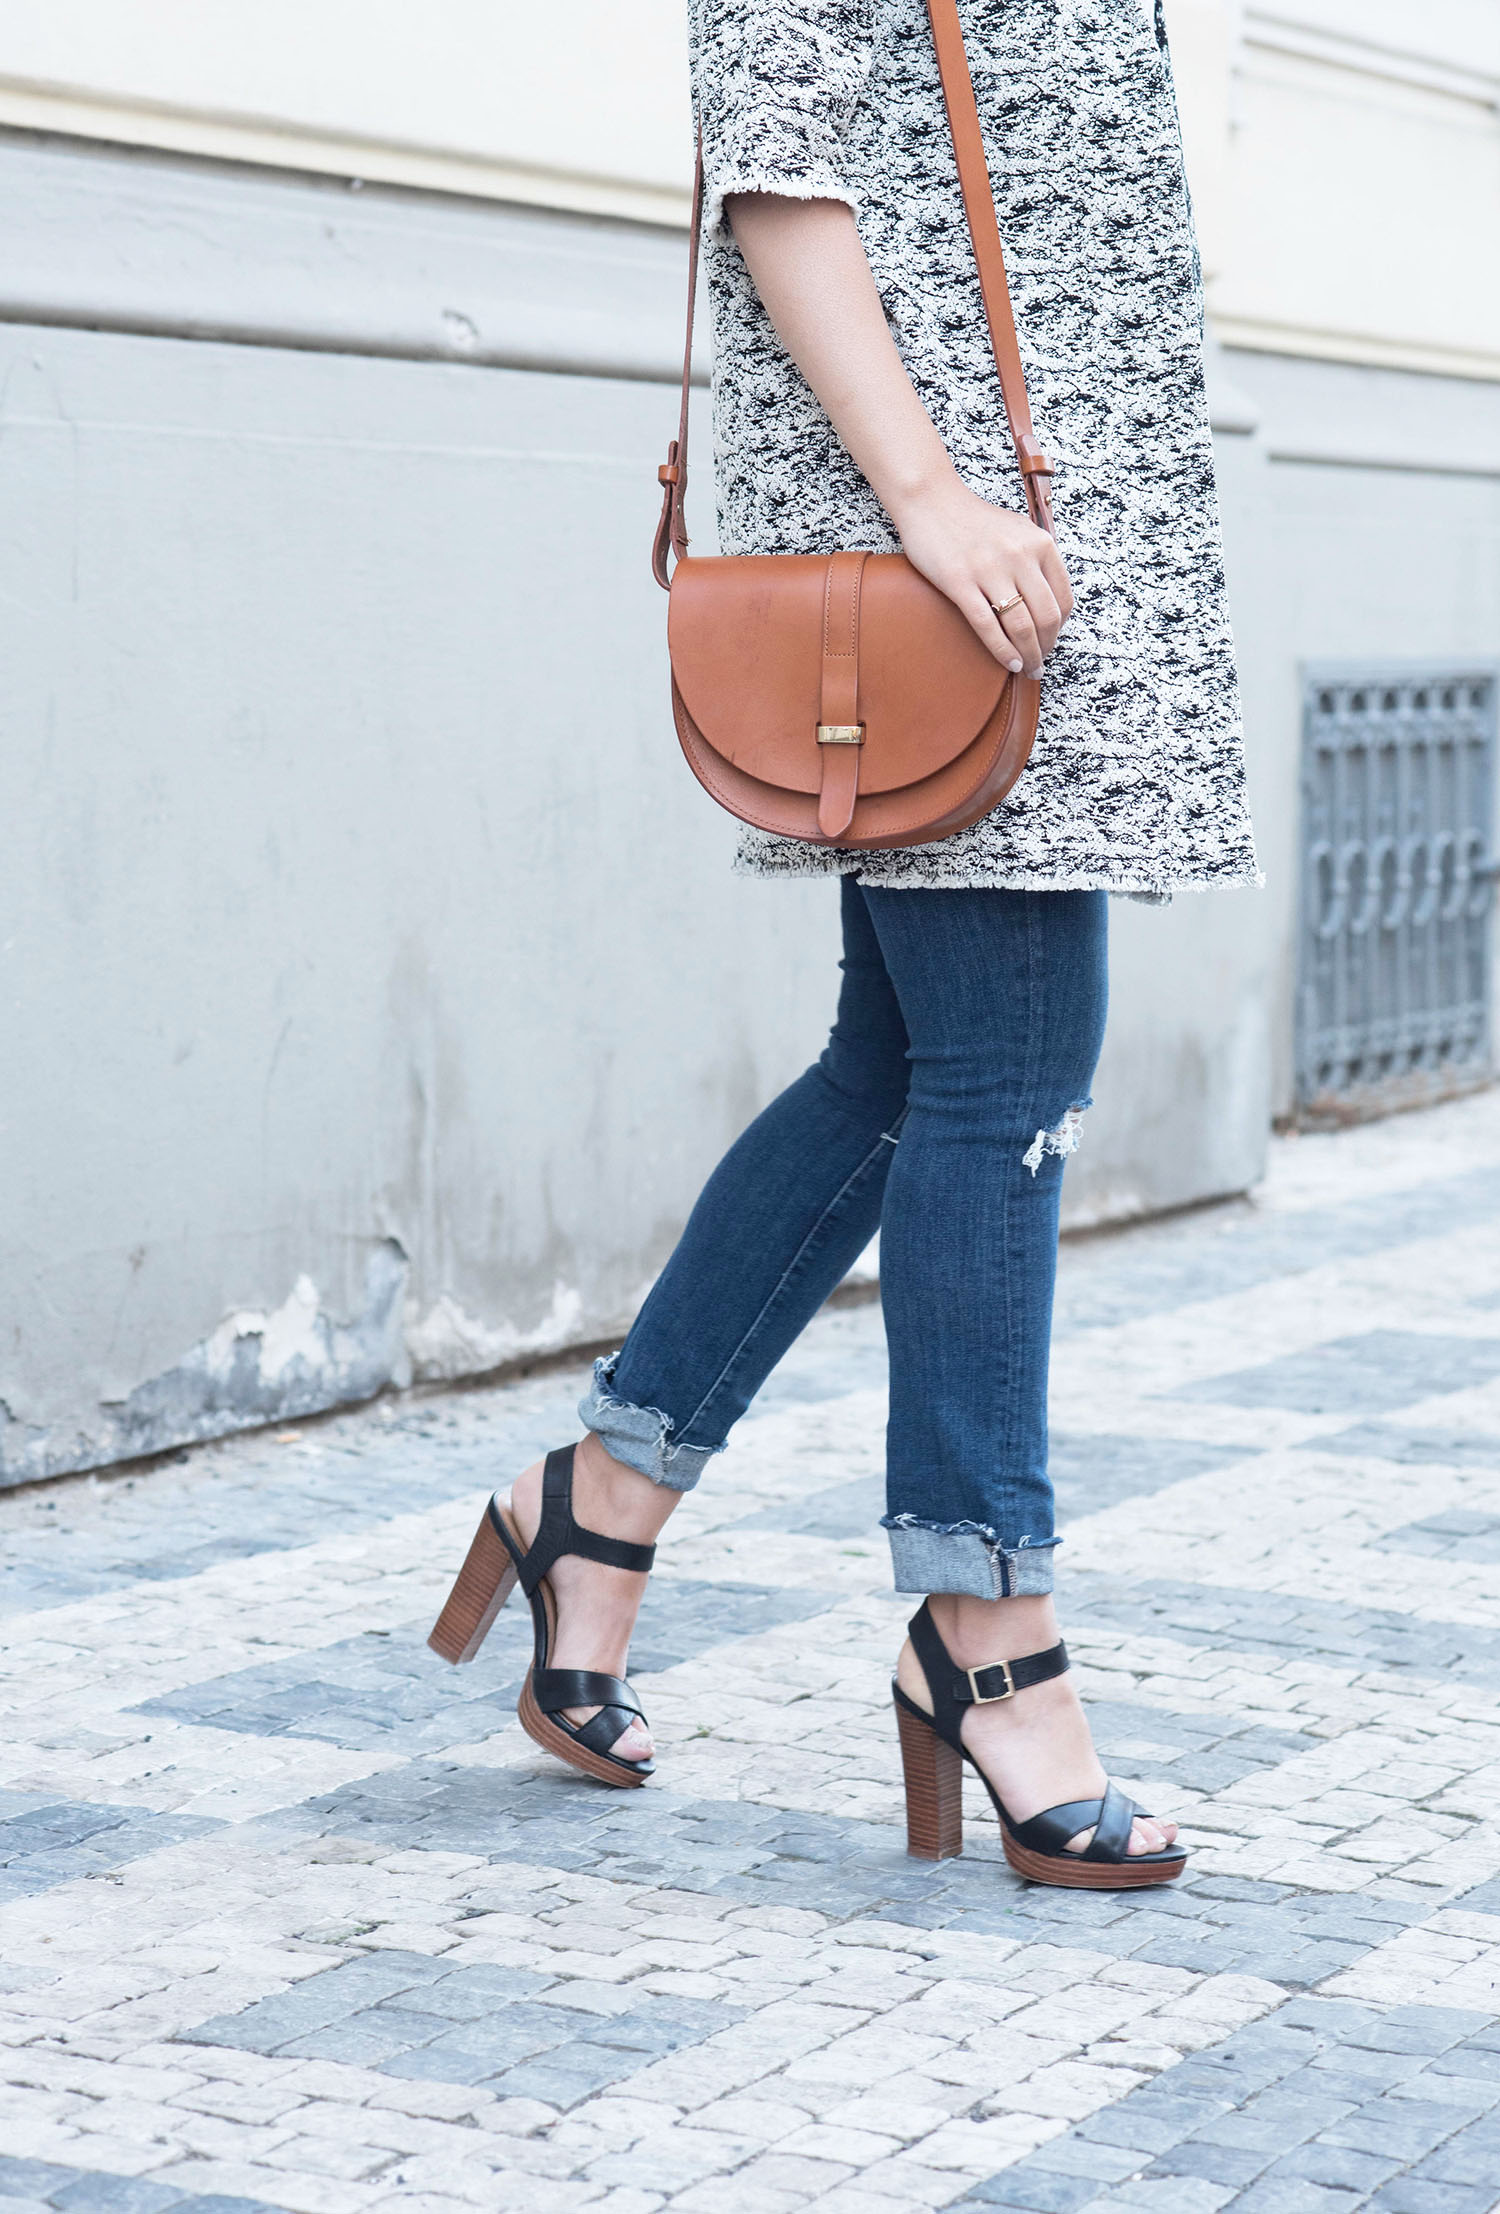 Outfit details on fashion blogger Cee Fardoe of Coco & Vera, including a Sezane Claude bag, Paige jeans and Le Chateau sandals